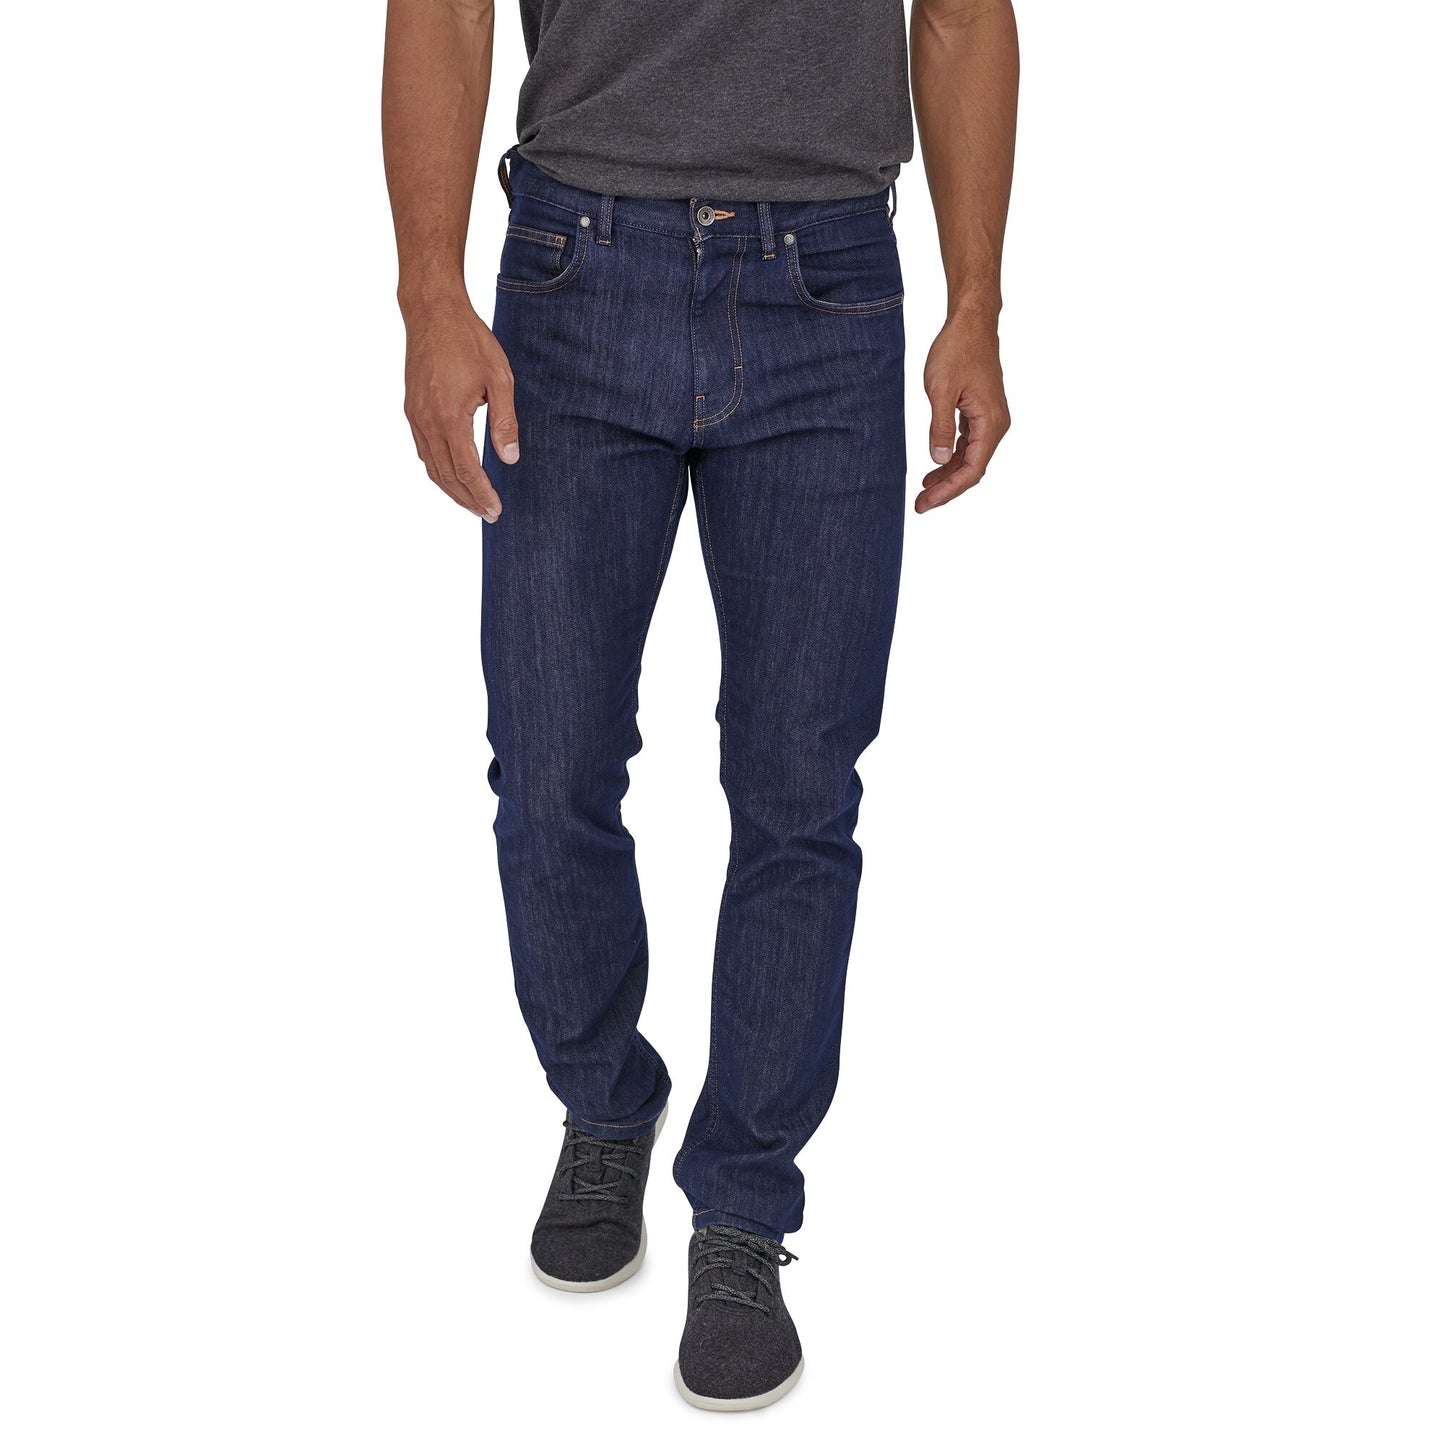 Patagonia Performance Straight Fit Jeans DDNM